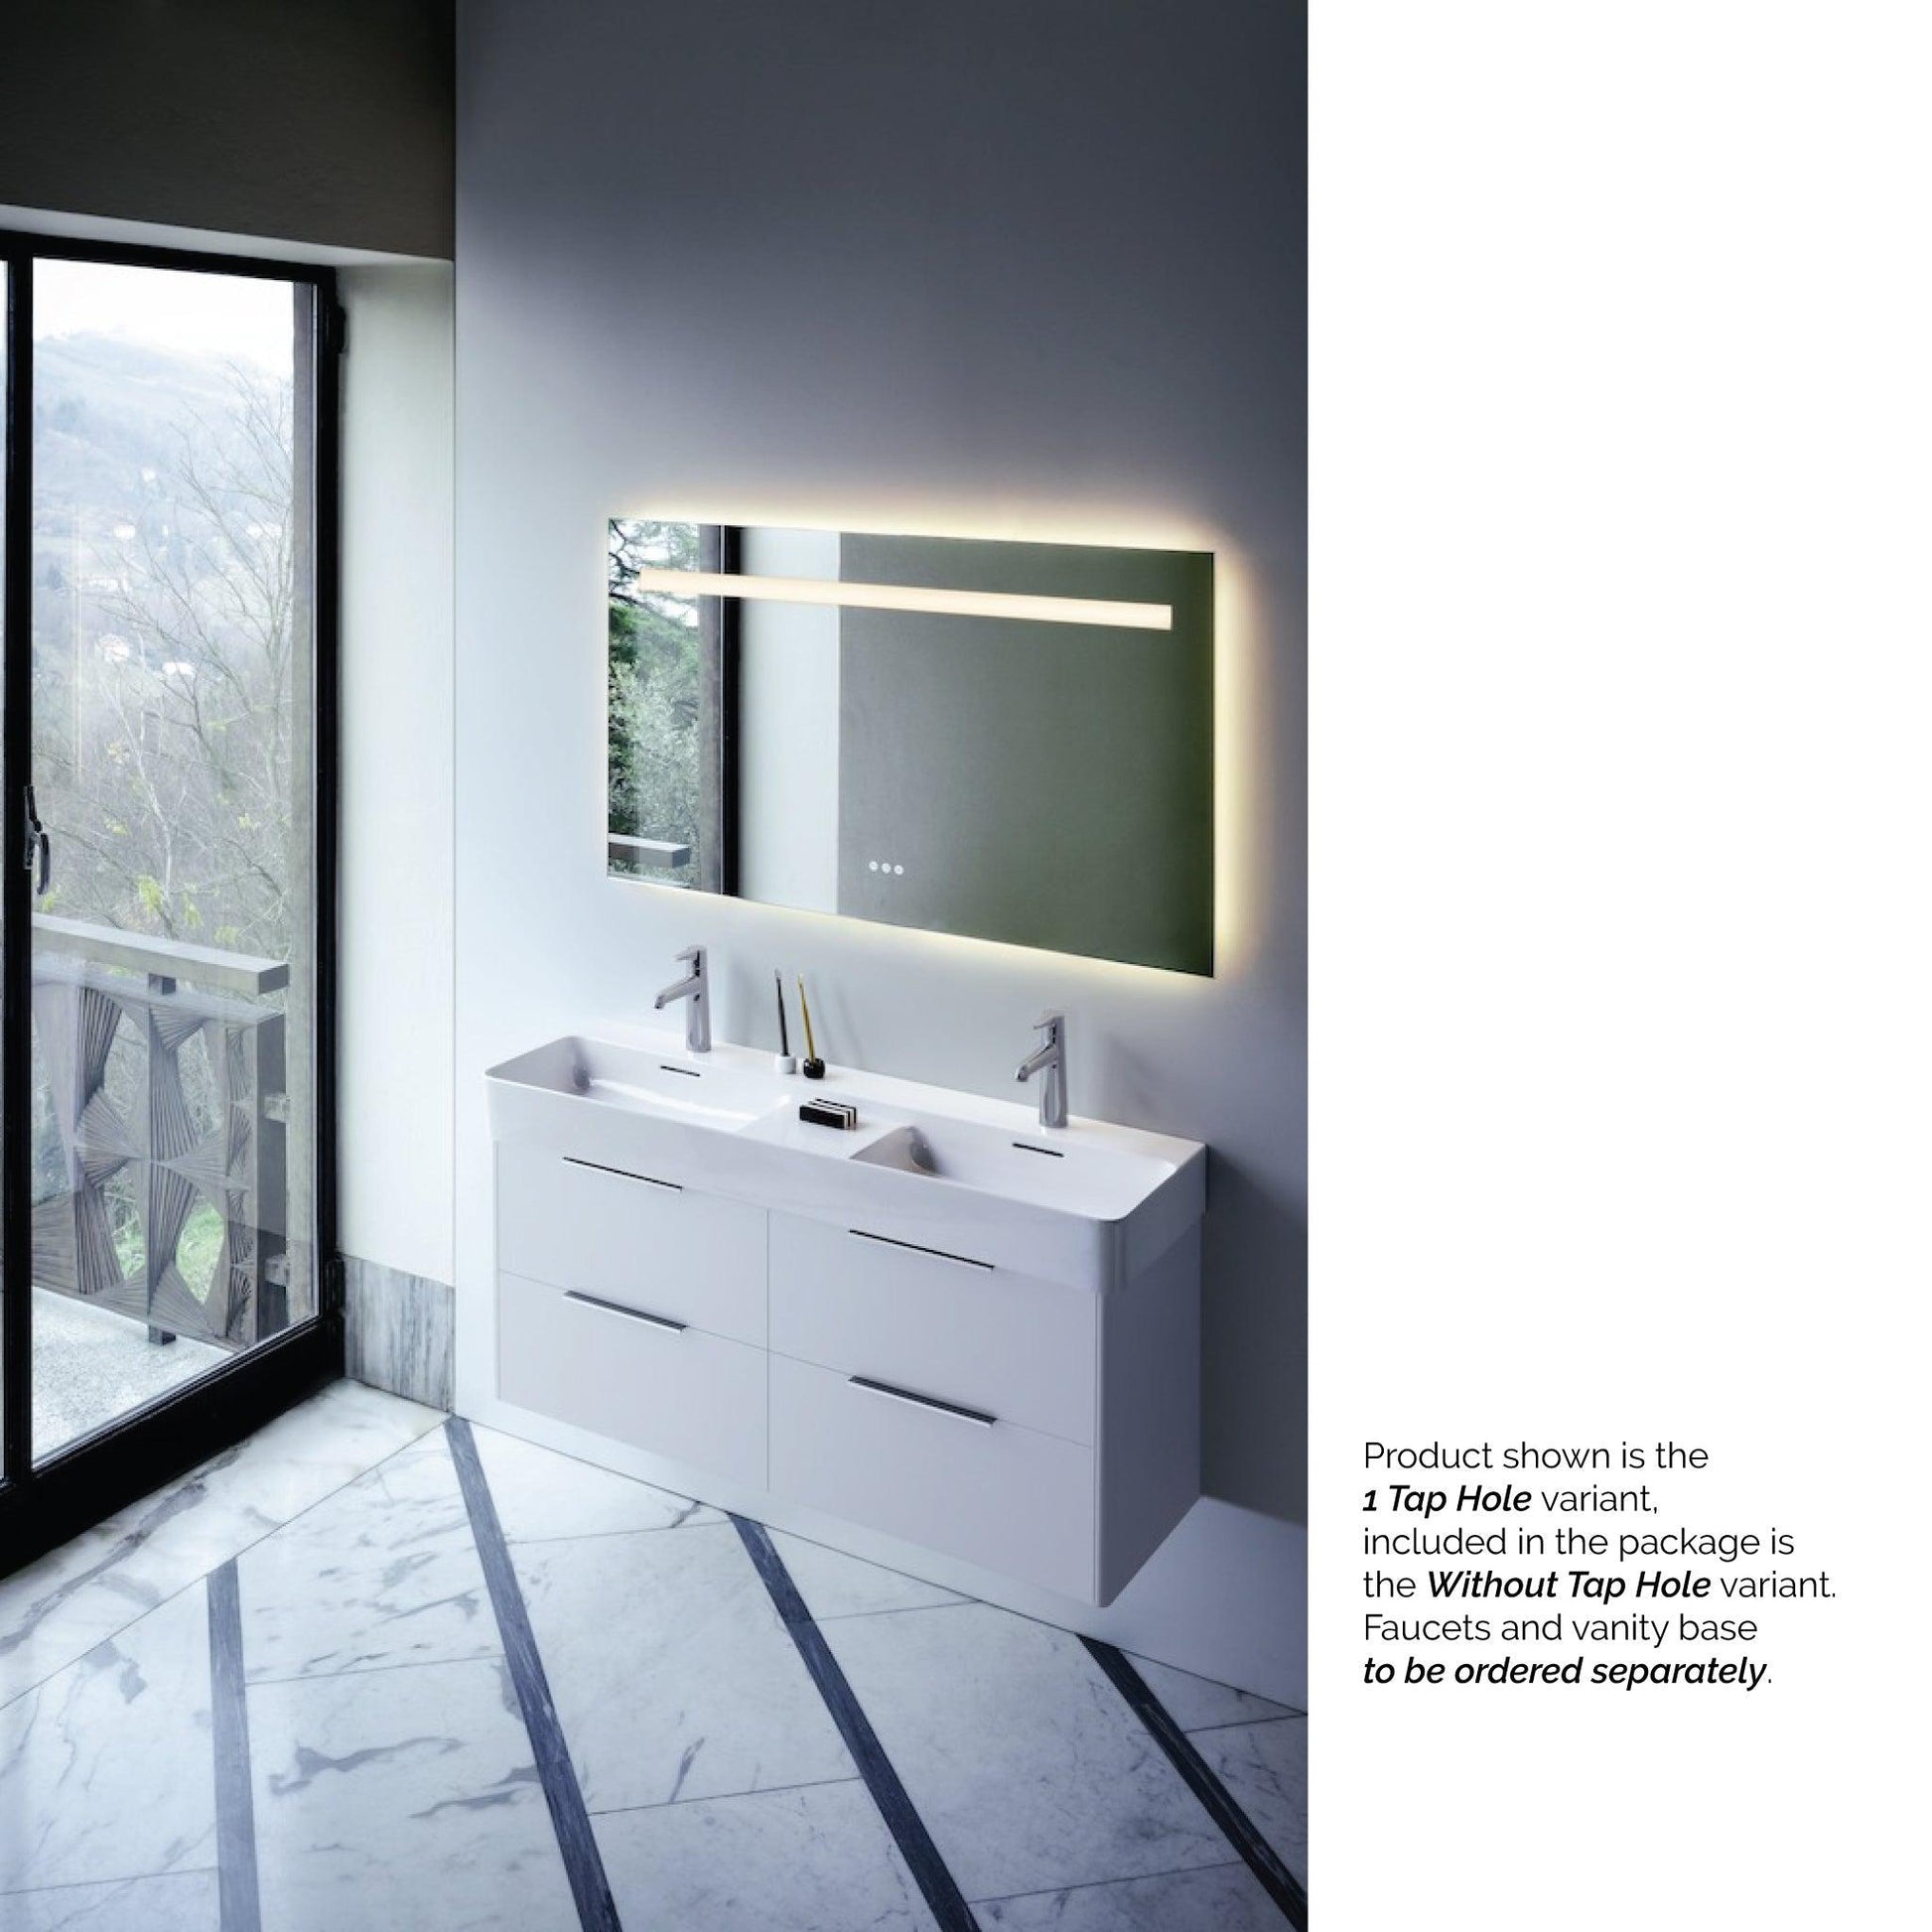 Laufen Val 47" x 17" Matte White Ceramic Wall-Mounted Double Bathroom Sink Without Faucet Hole